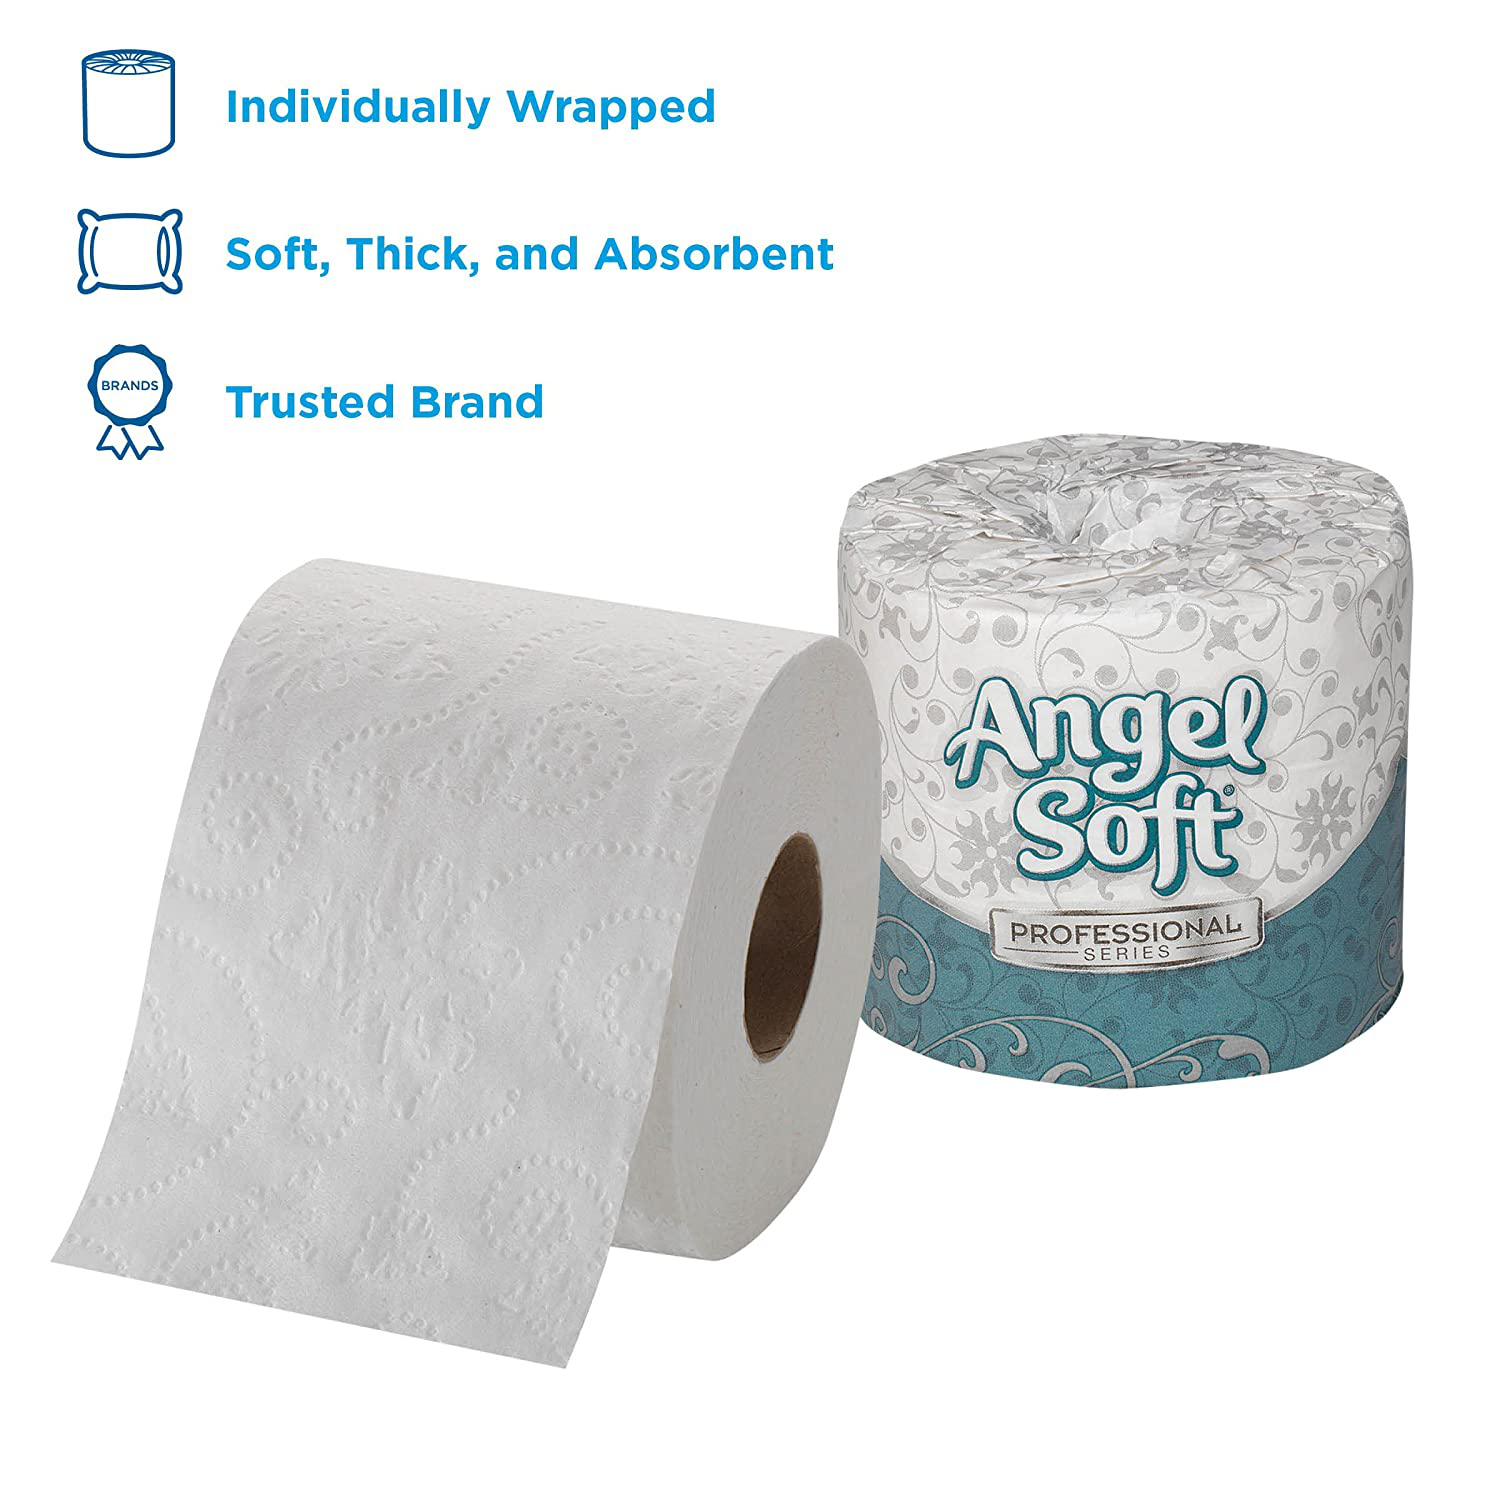 Angel Soft Professional Series Premium 2-Ply Embossed Toilet Paper by GP PRO (Georgia-Pacific), 16880, 450 Sheets Per Roll, 80 Rolls Per Case, White